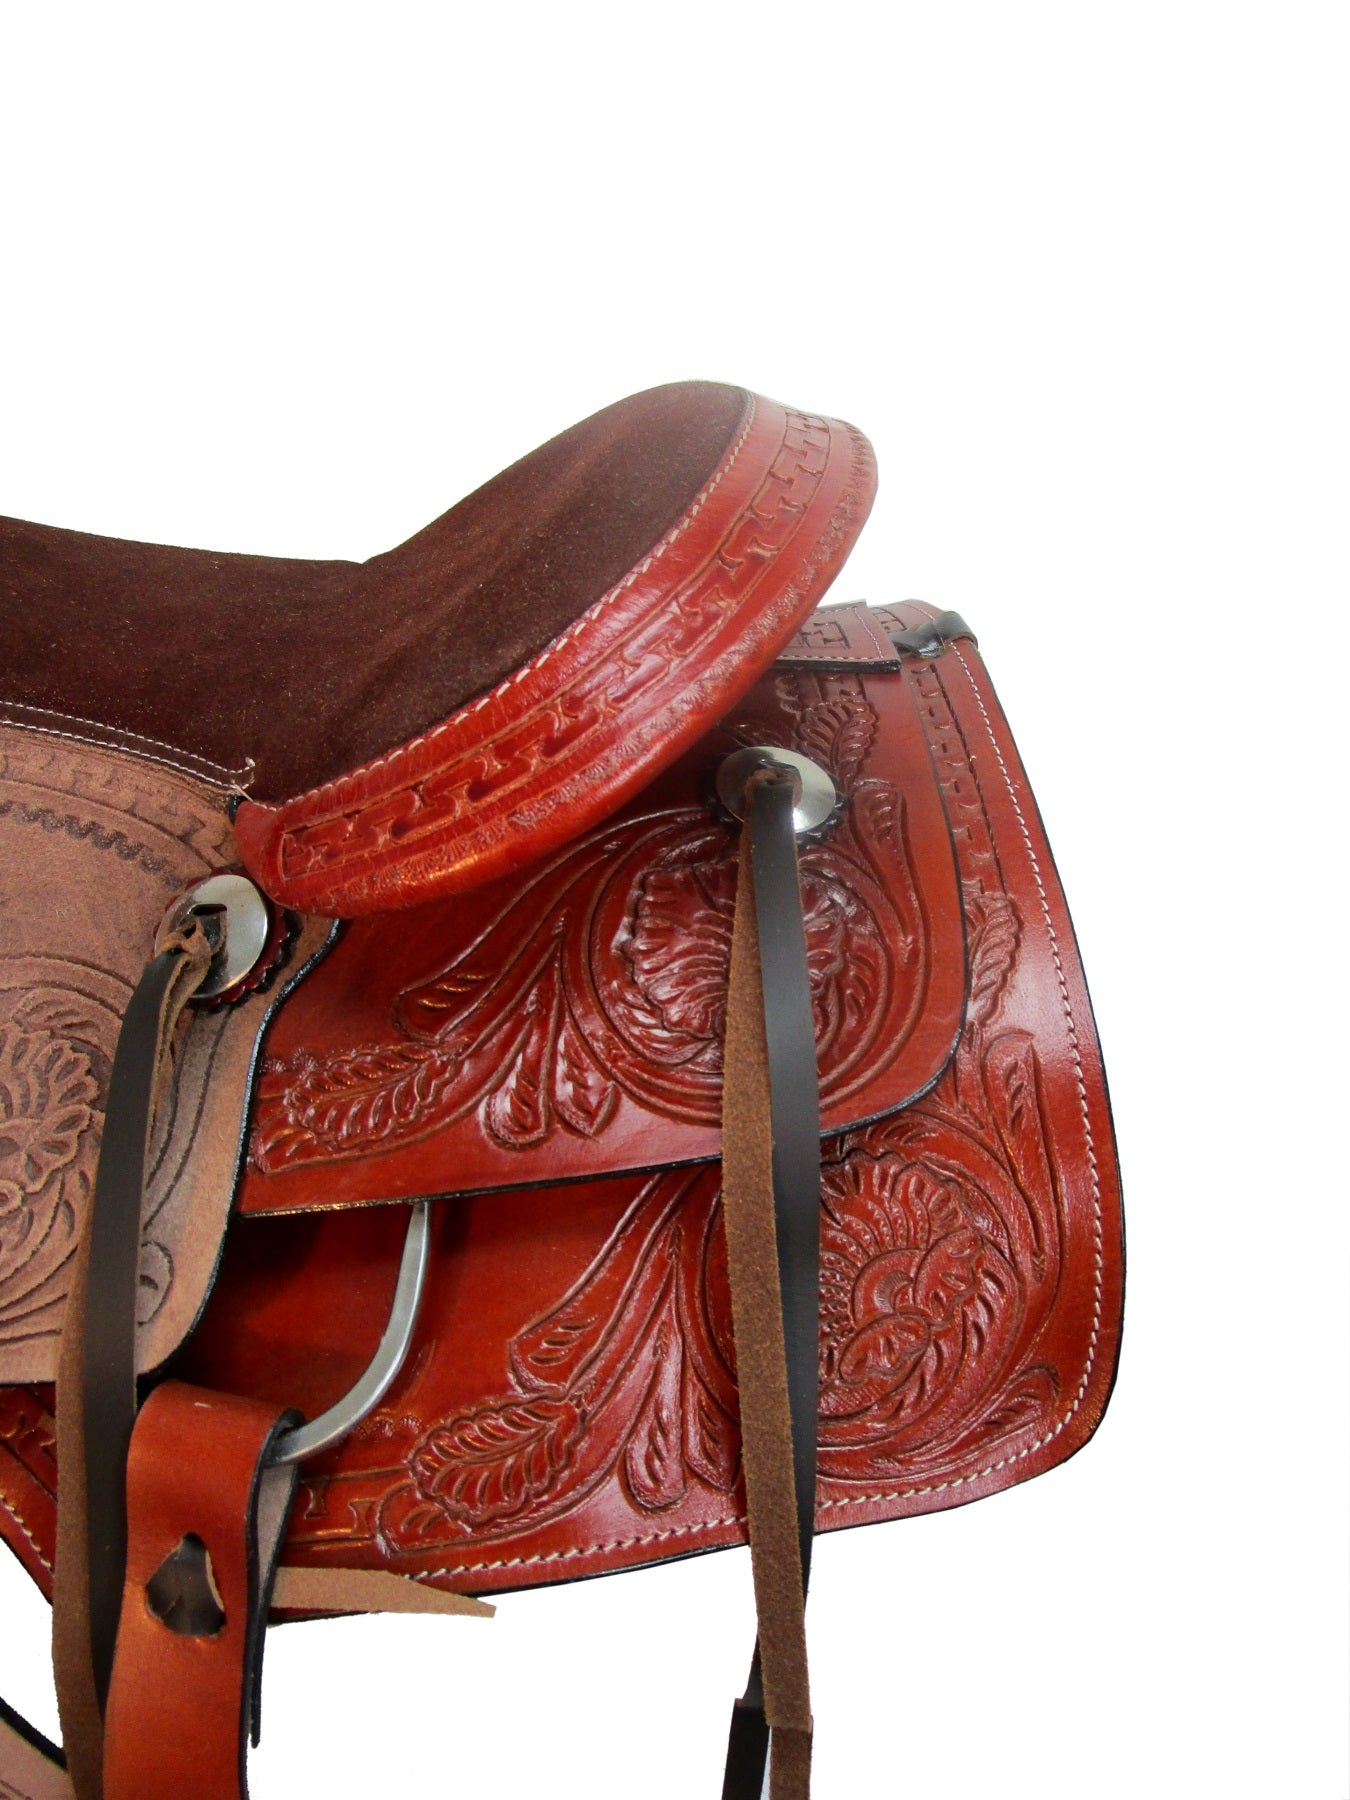 15 16 17 Roping Western Saddle Ranch Horse Pleasure Trail Leather Tack